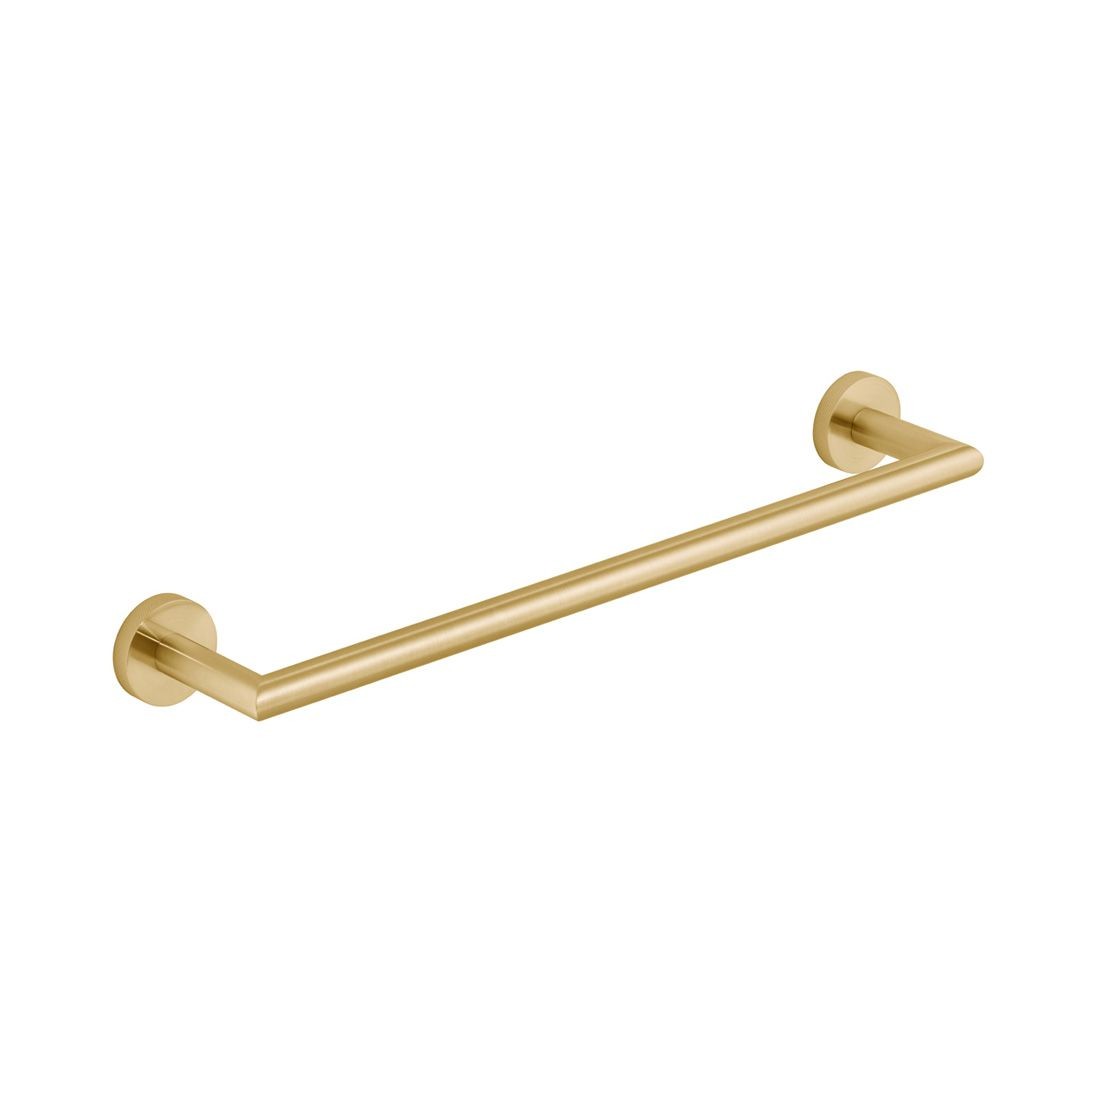 Individual by Vado Spa Towel Rail 450mm (18 inch) with Knurled Accents Brushed Gold [IND-SPA184-45-BRGK]